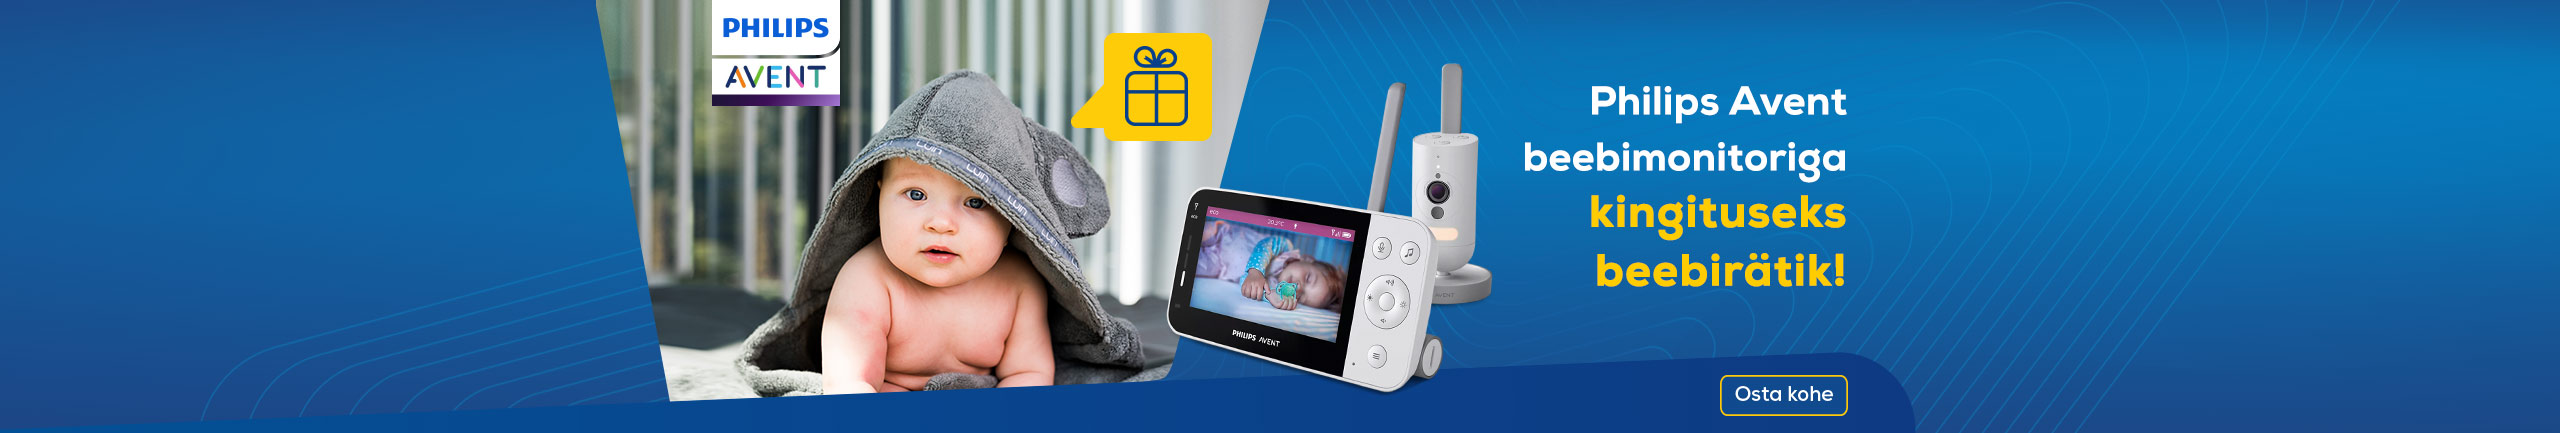 Buy Philips Avent baby monitor and receive a gift!